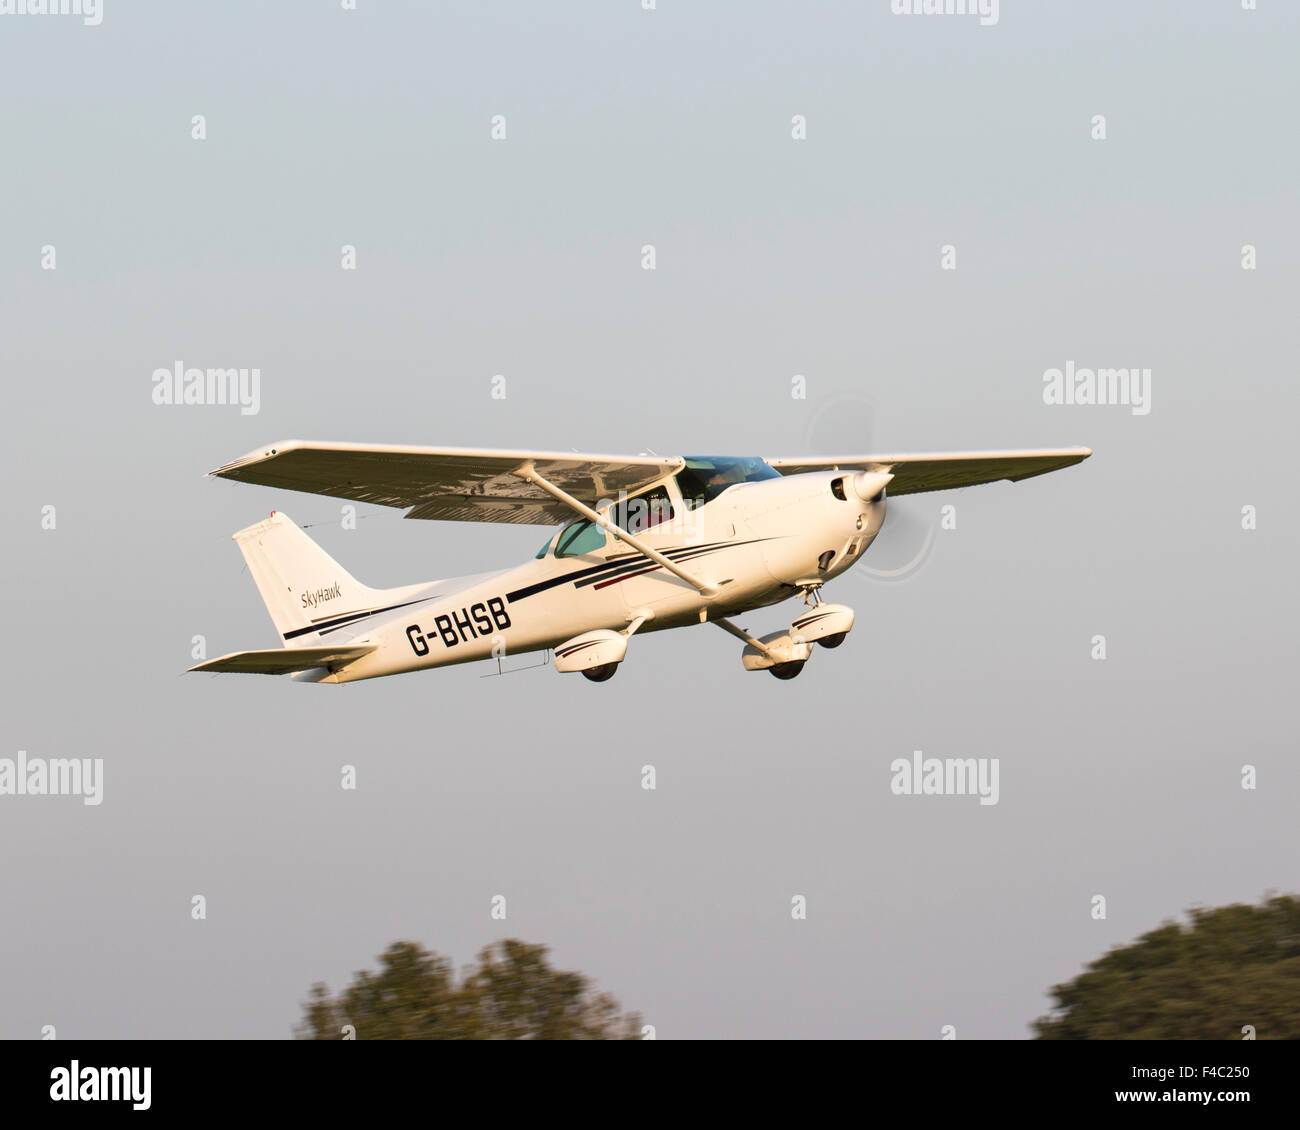 Cessna 172 G-BHSB aircraft taking off at Old Warden airfield Stock Photo